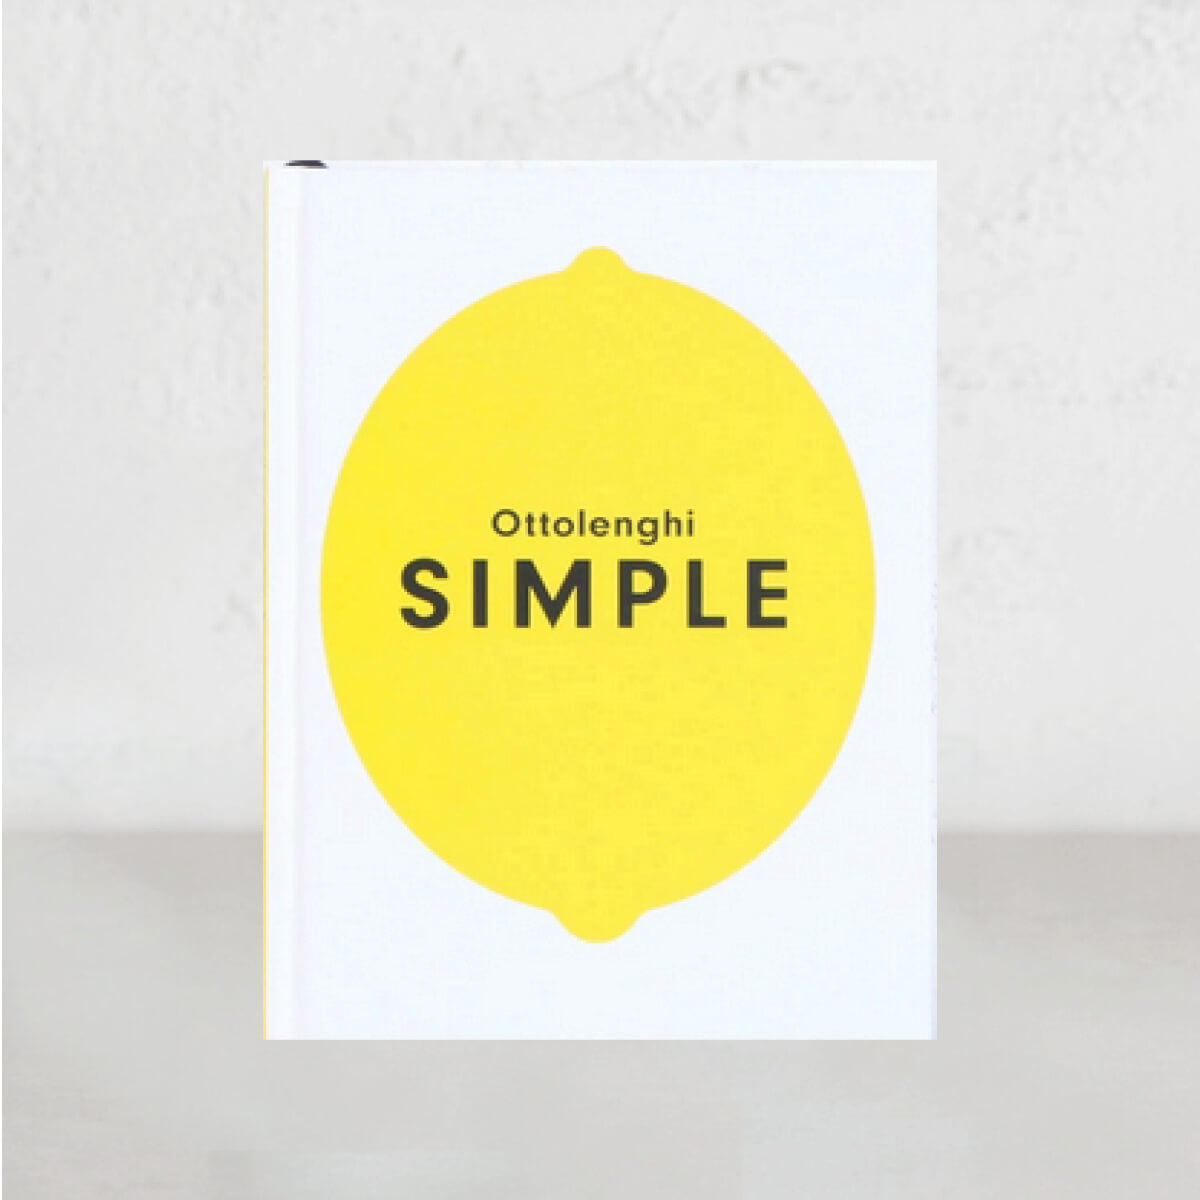 OTTOLENGHI SIMPLE  COOK BOOK – Living By Design